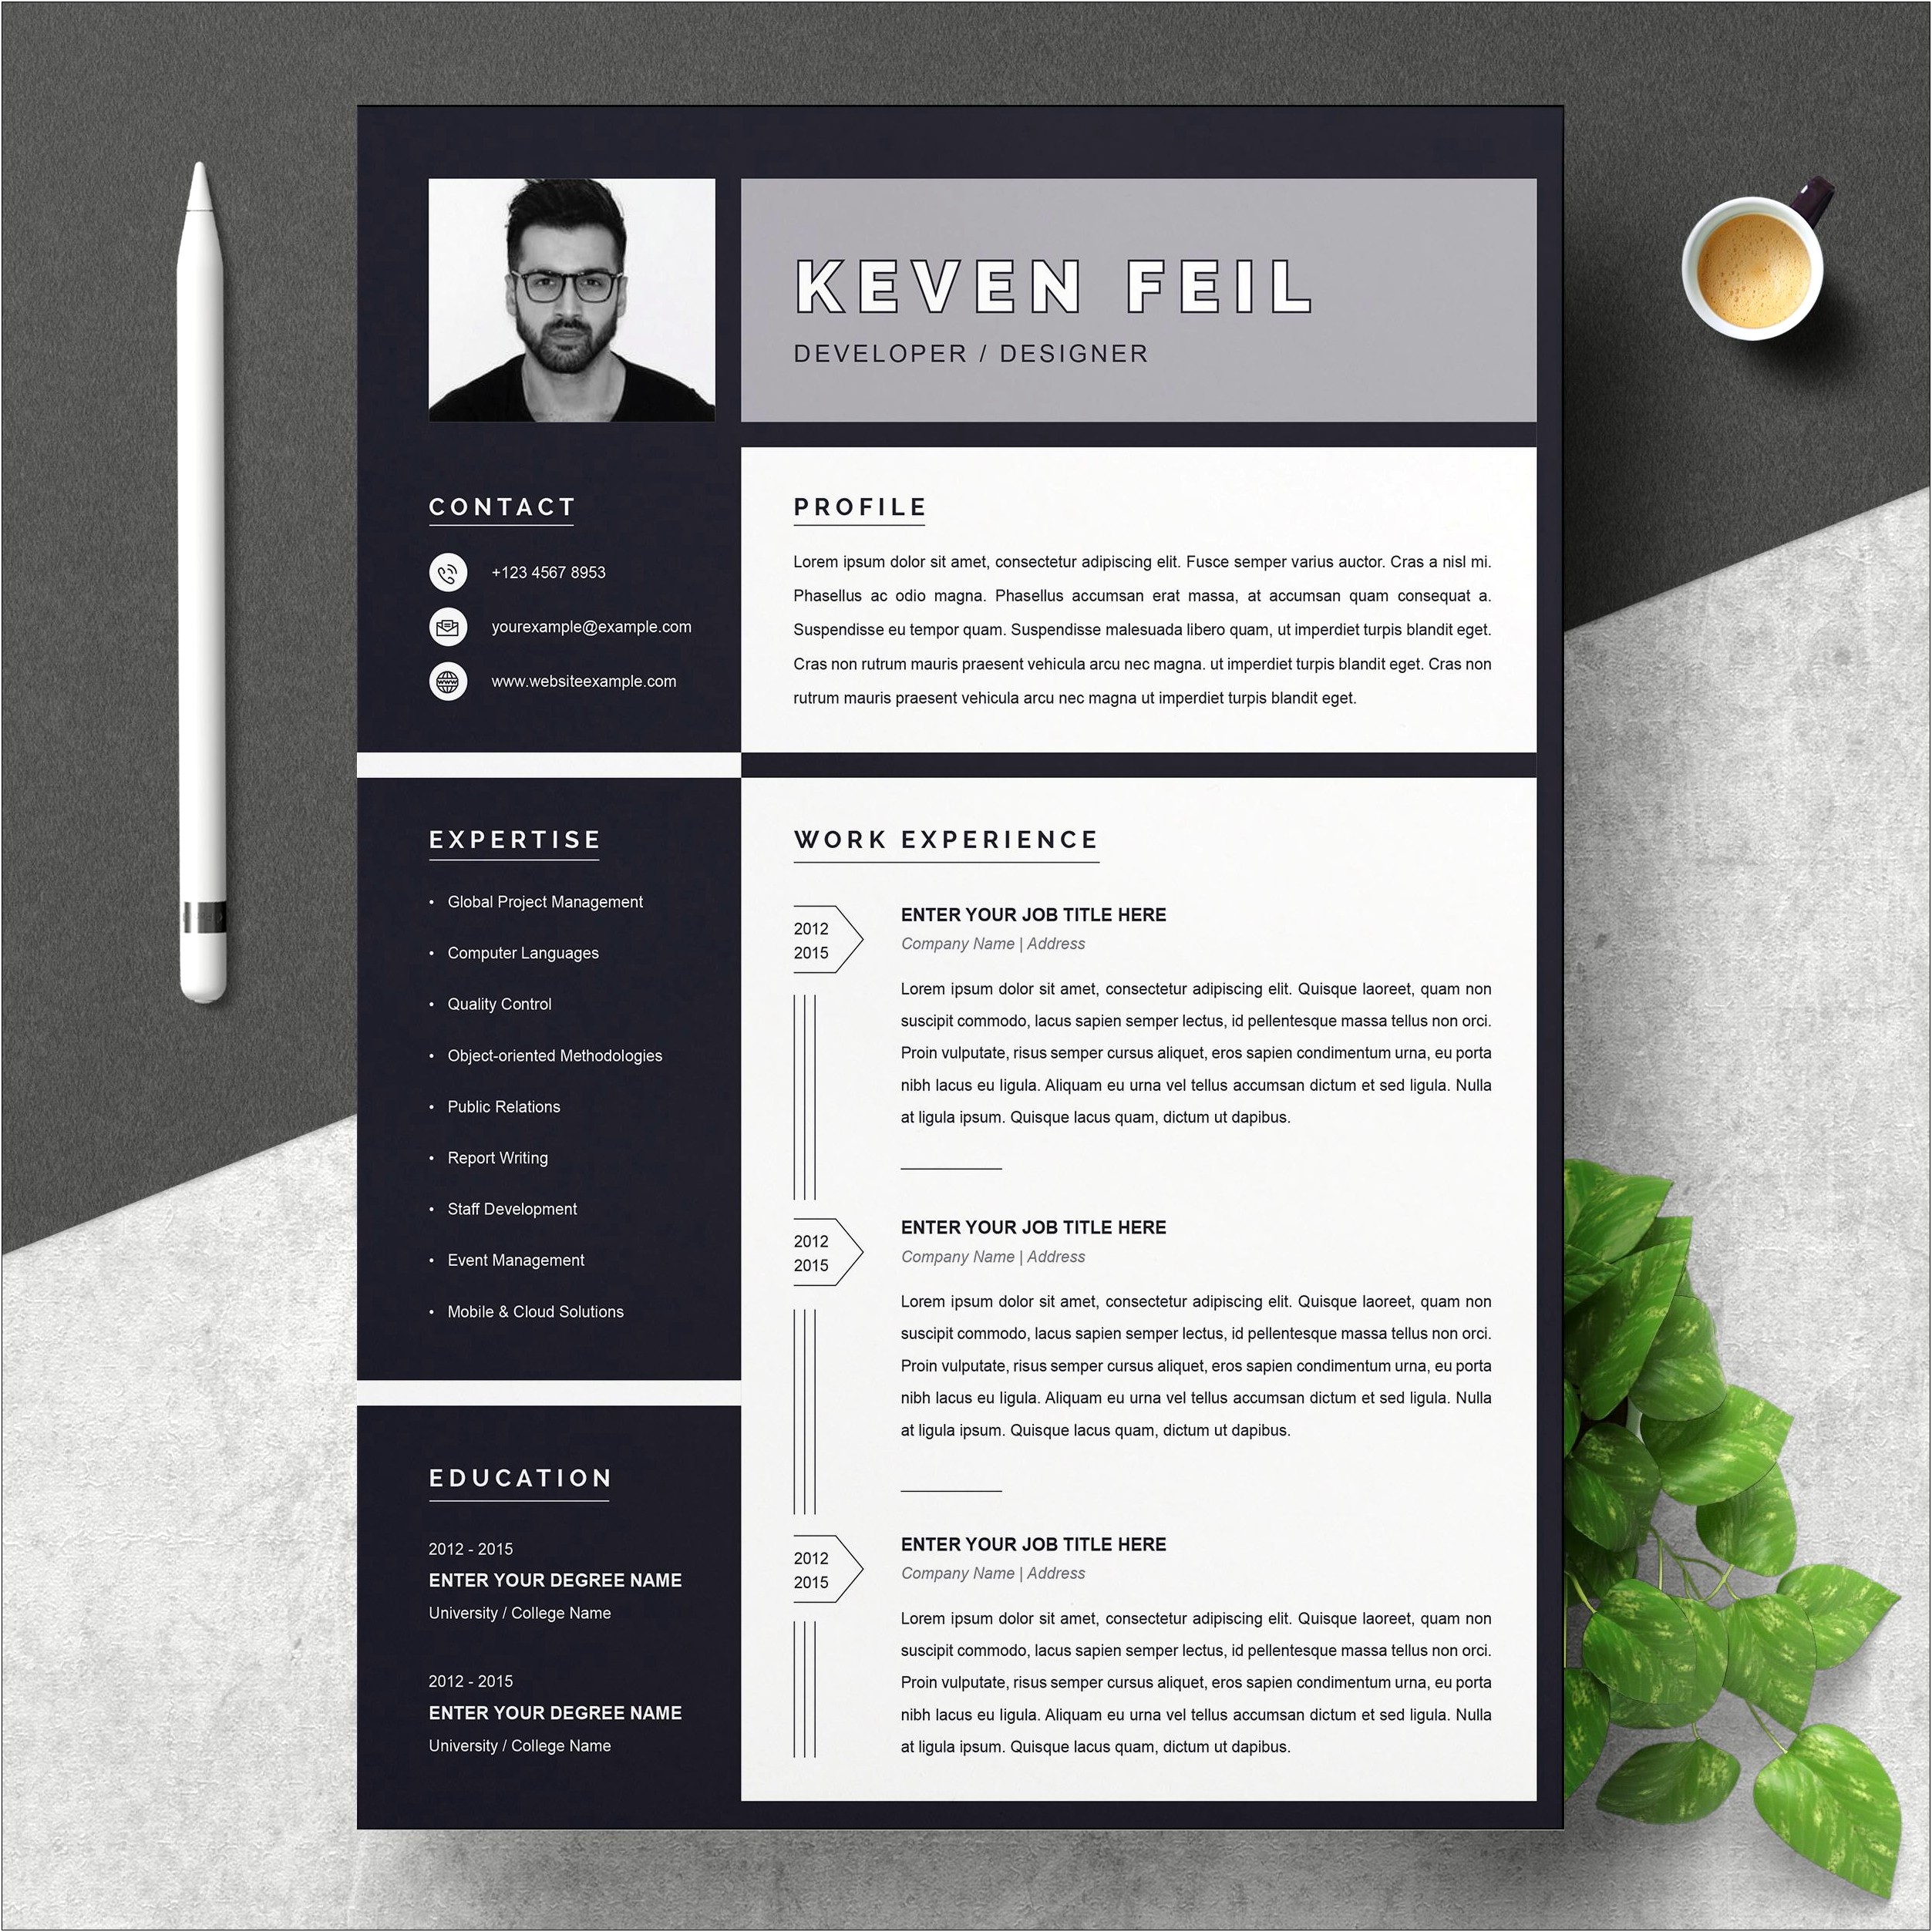 Are There Any Free Resume Templates